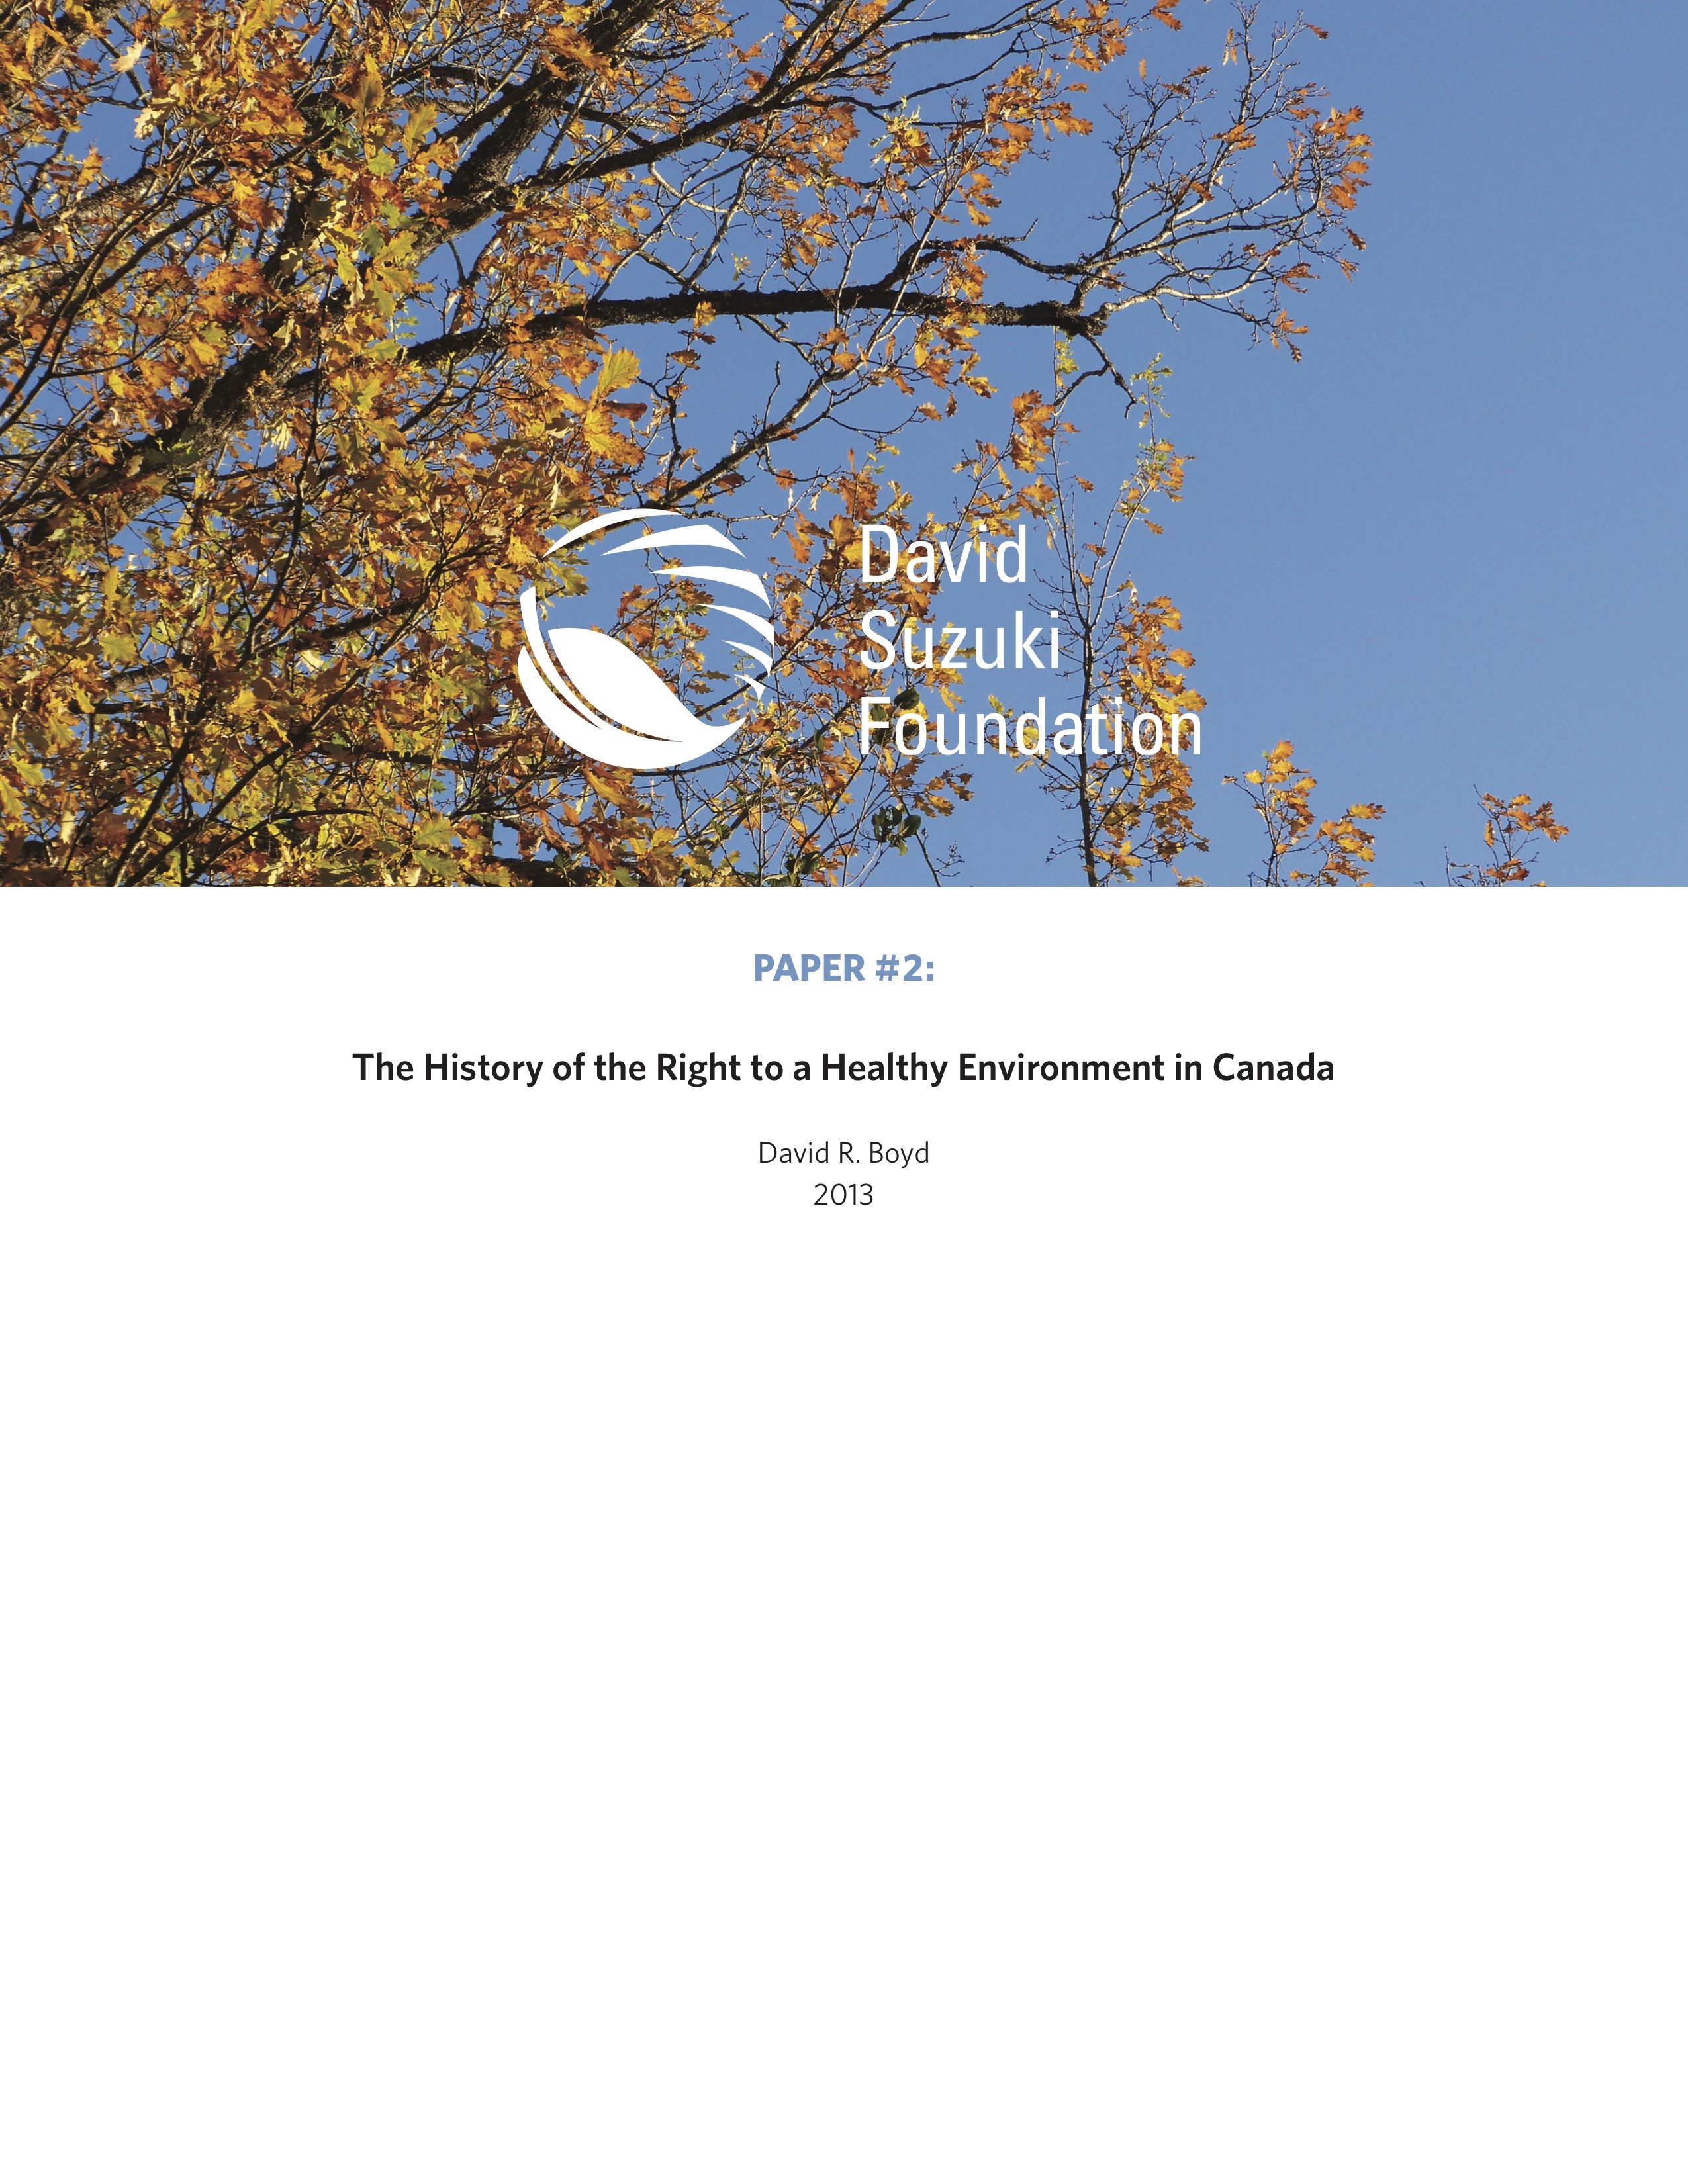 The History of the Right to a Healthy Environment in Canada